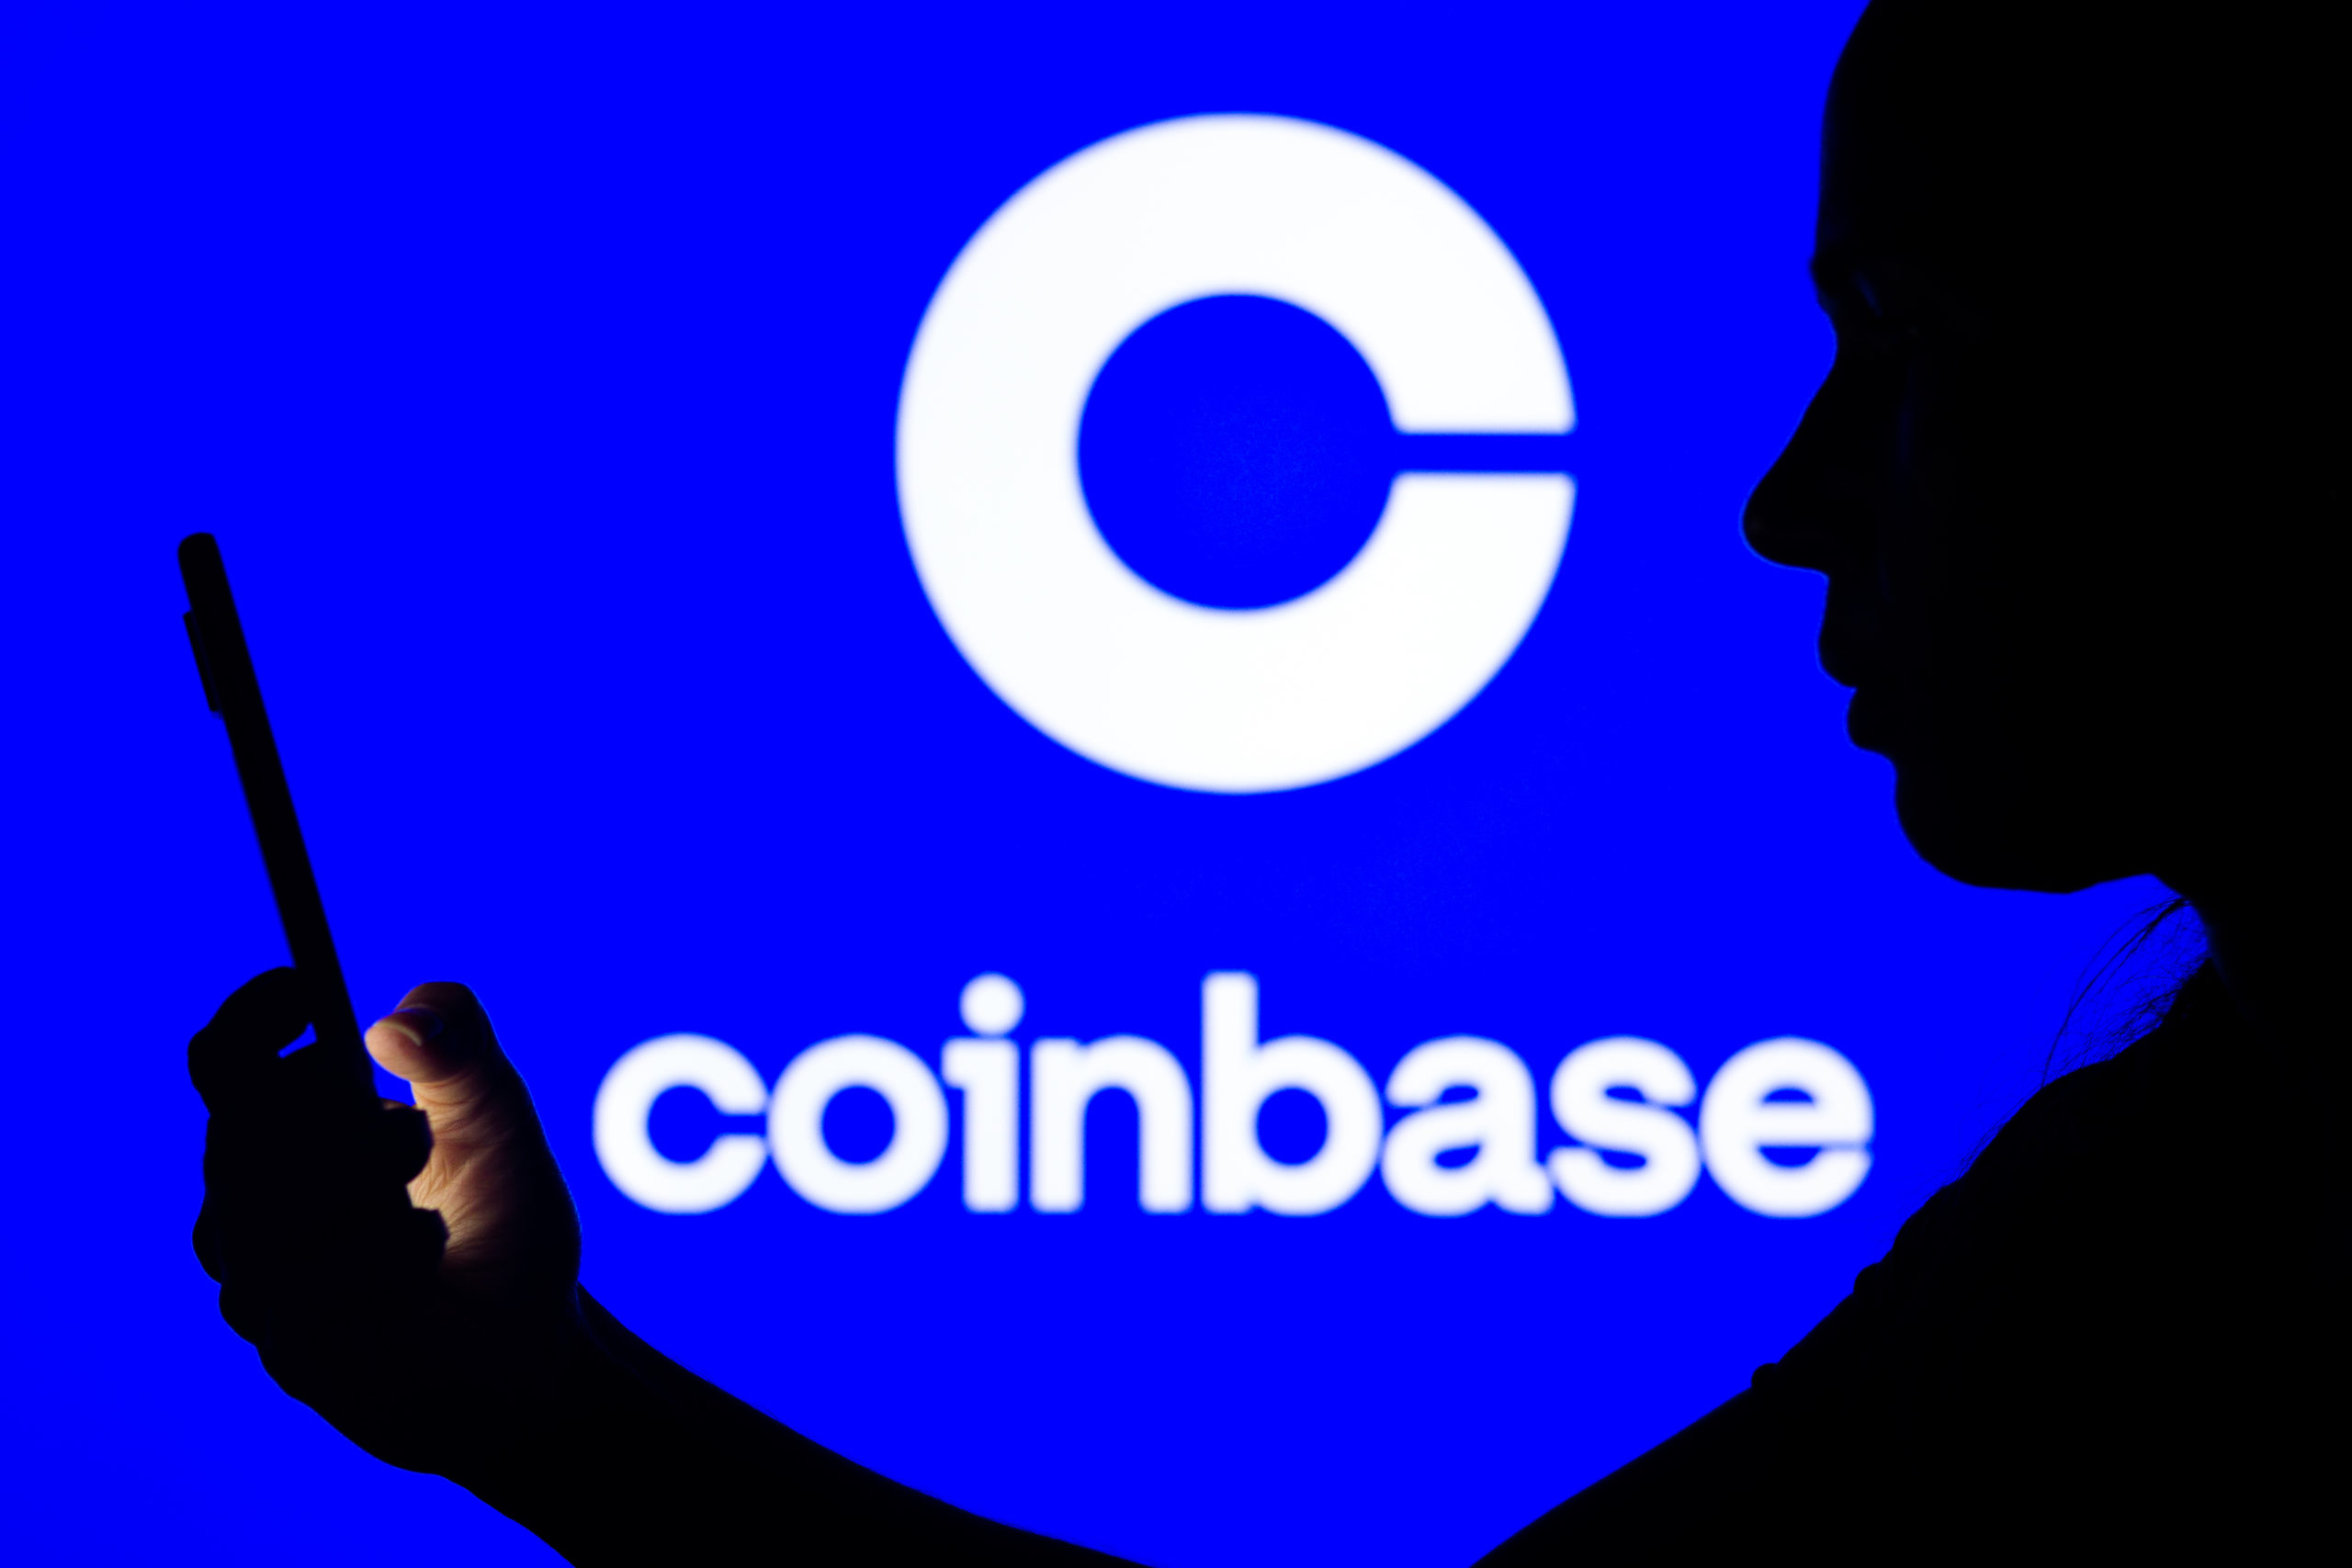 Coinbase will reportedly sell crypto user geo-location data to U.S. ICE immigrations and customs agency